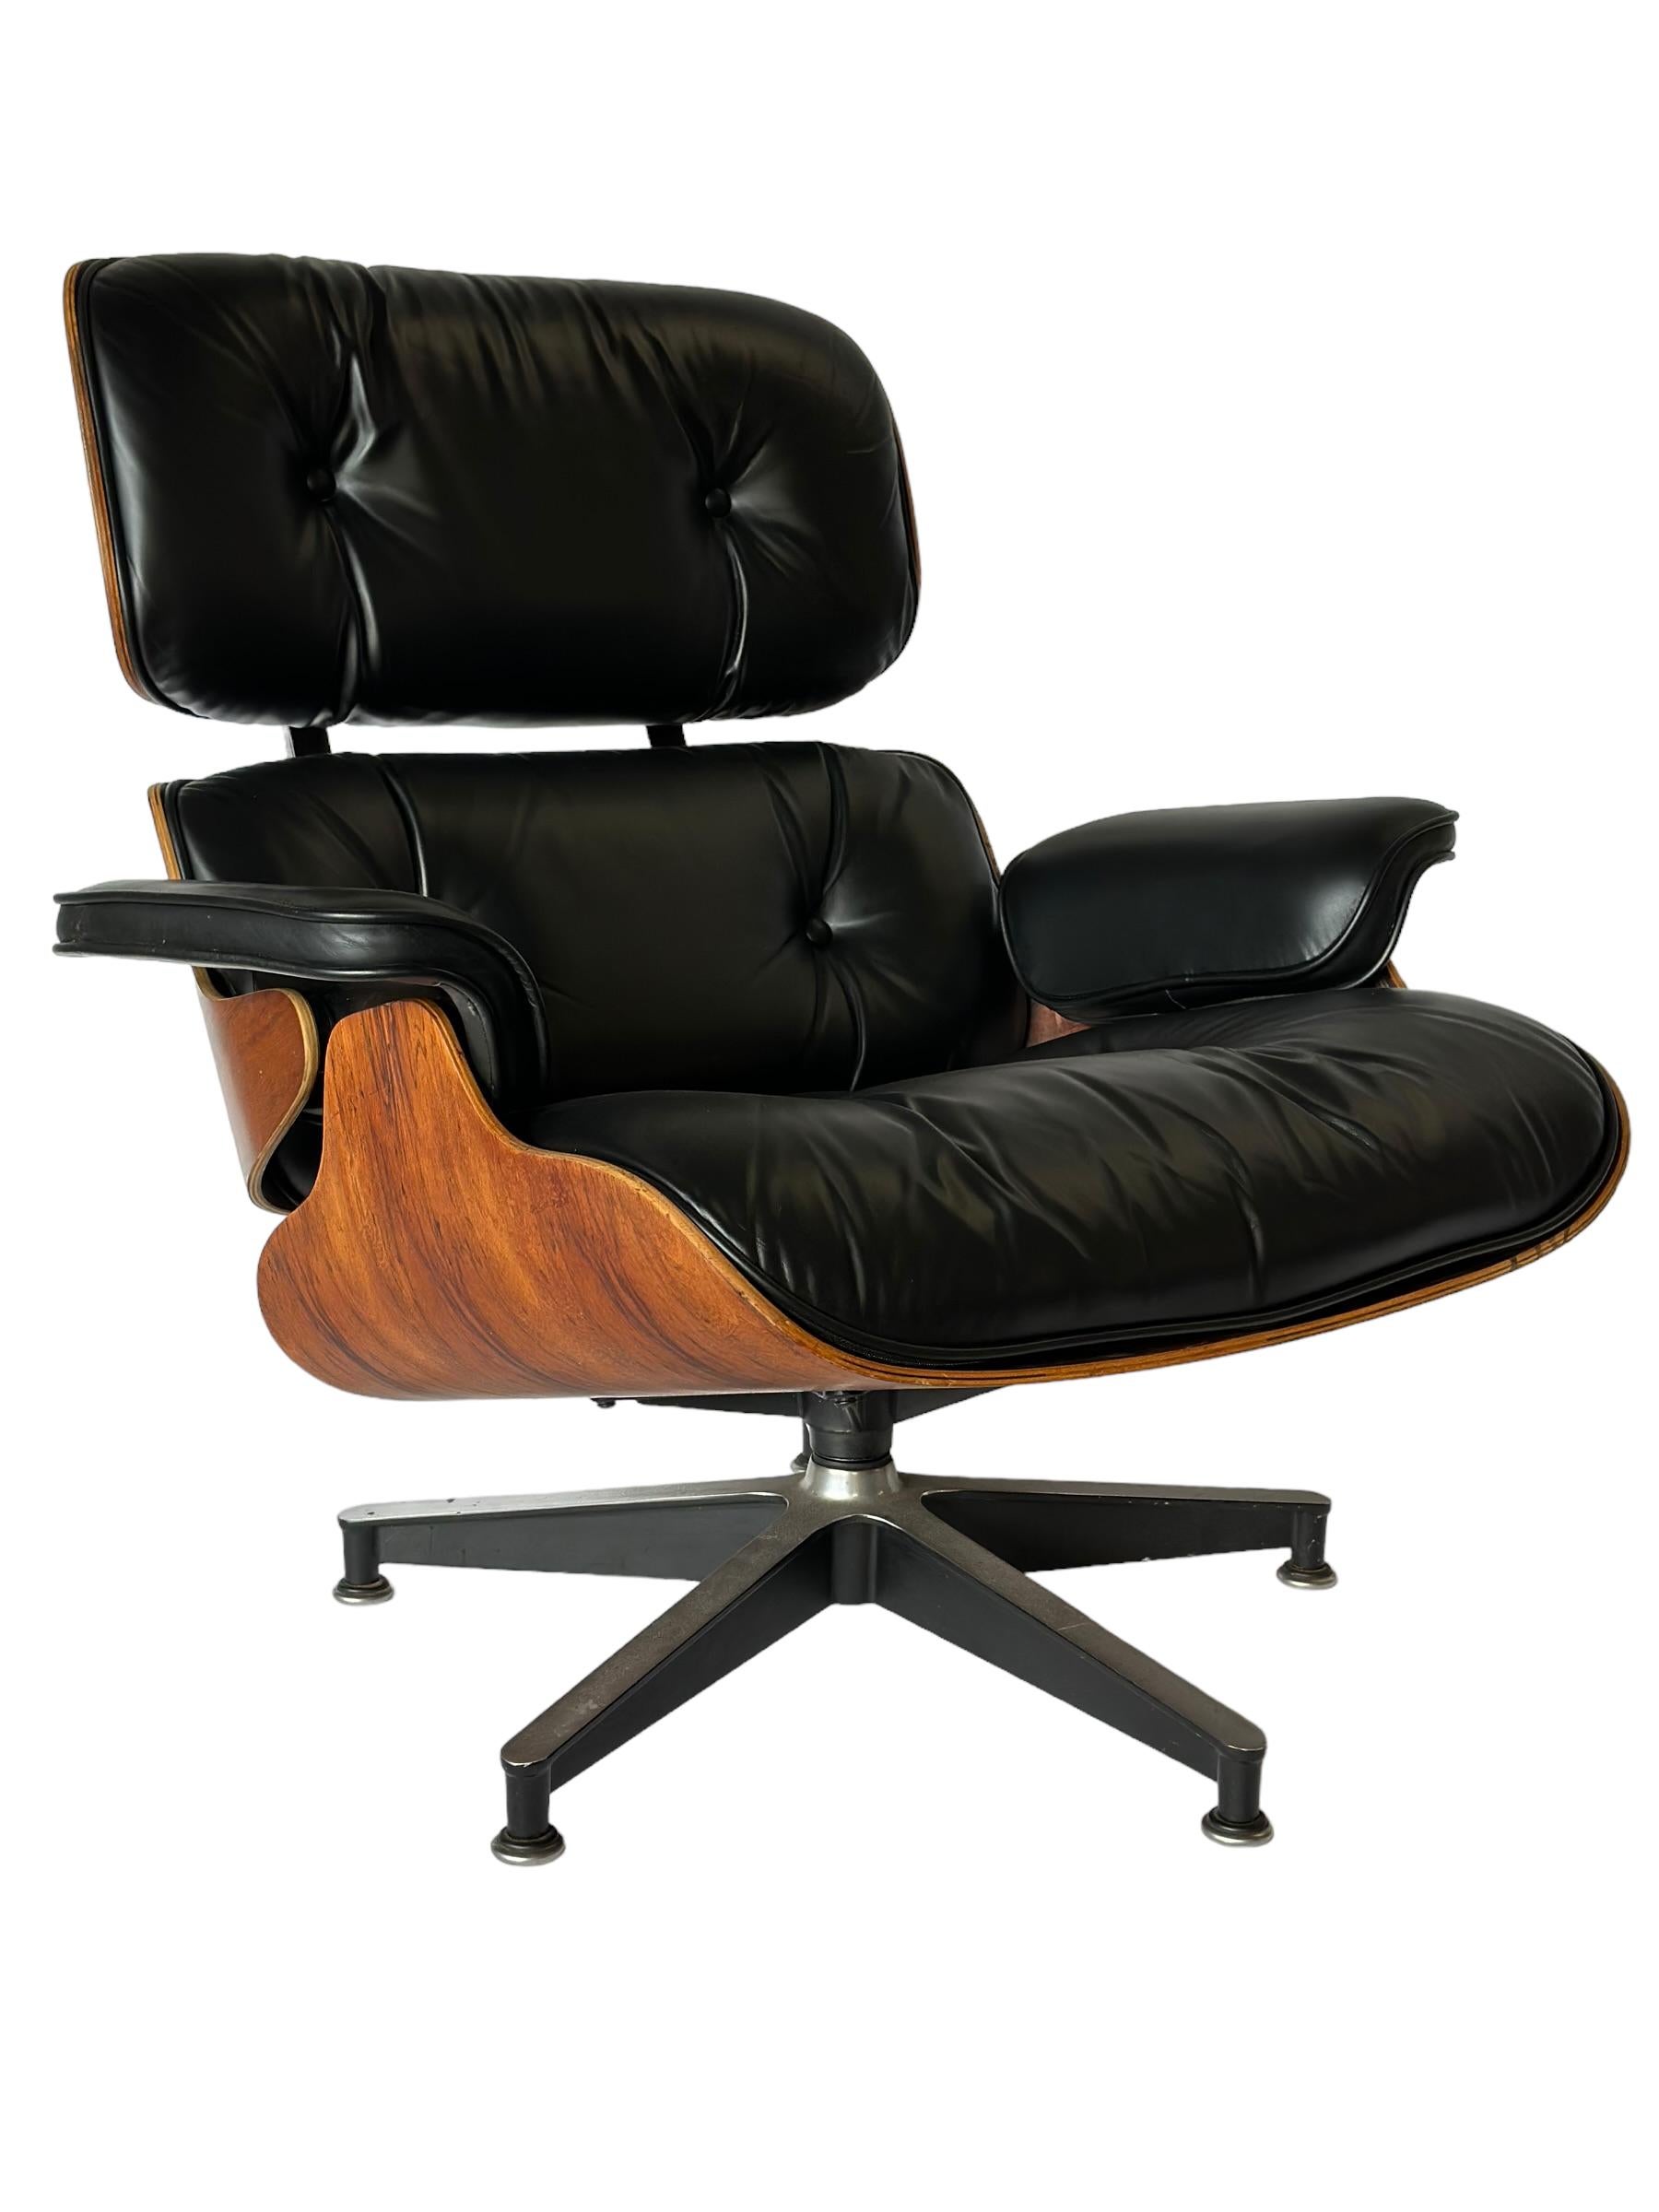 Restored Herman Miller Eames Lounge and Ottoman 6